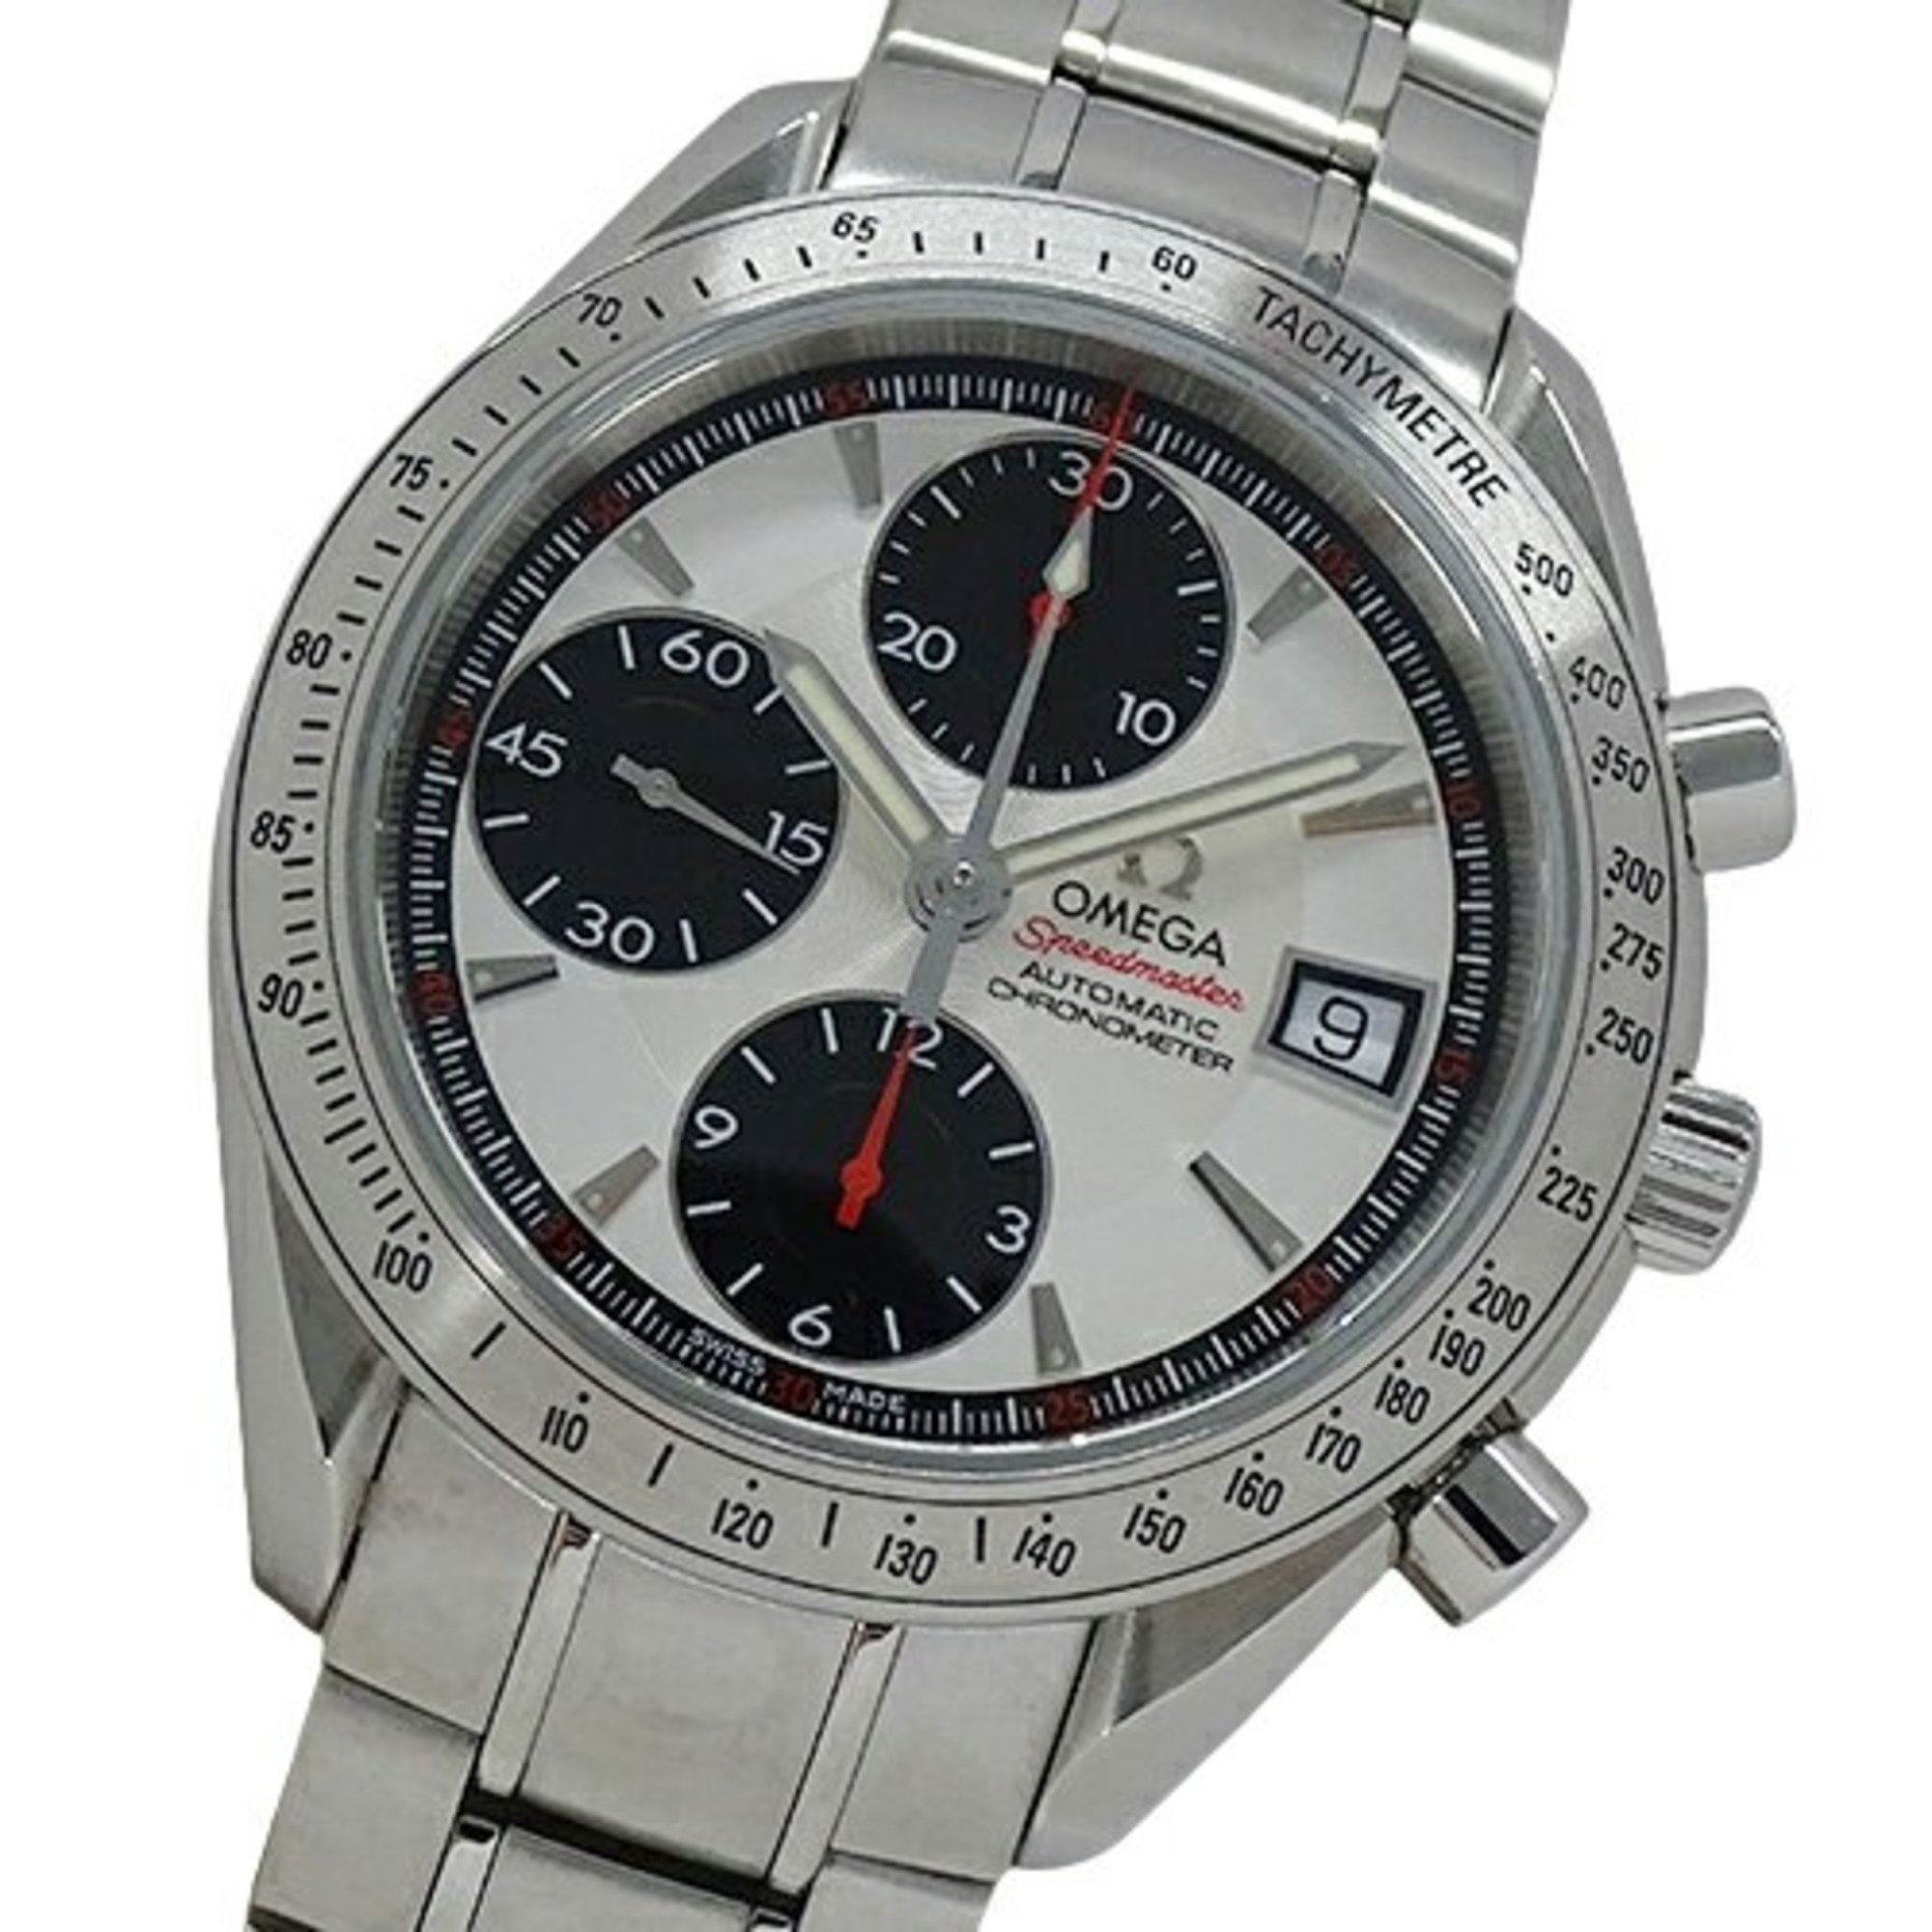 OMEGA Speedmaster 3211.31 Watch Men's Date Chronometer Automatic AT Stainless Steel SS Silver Polished